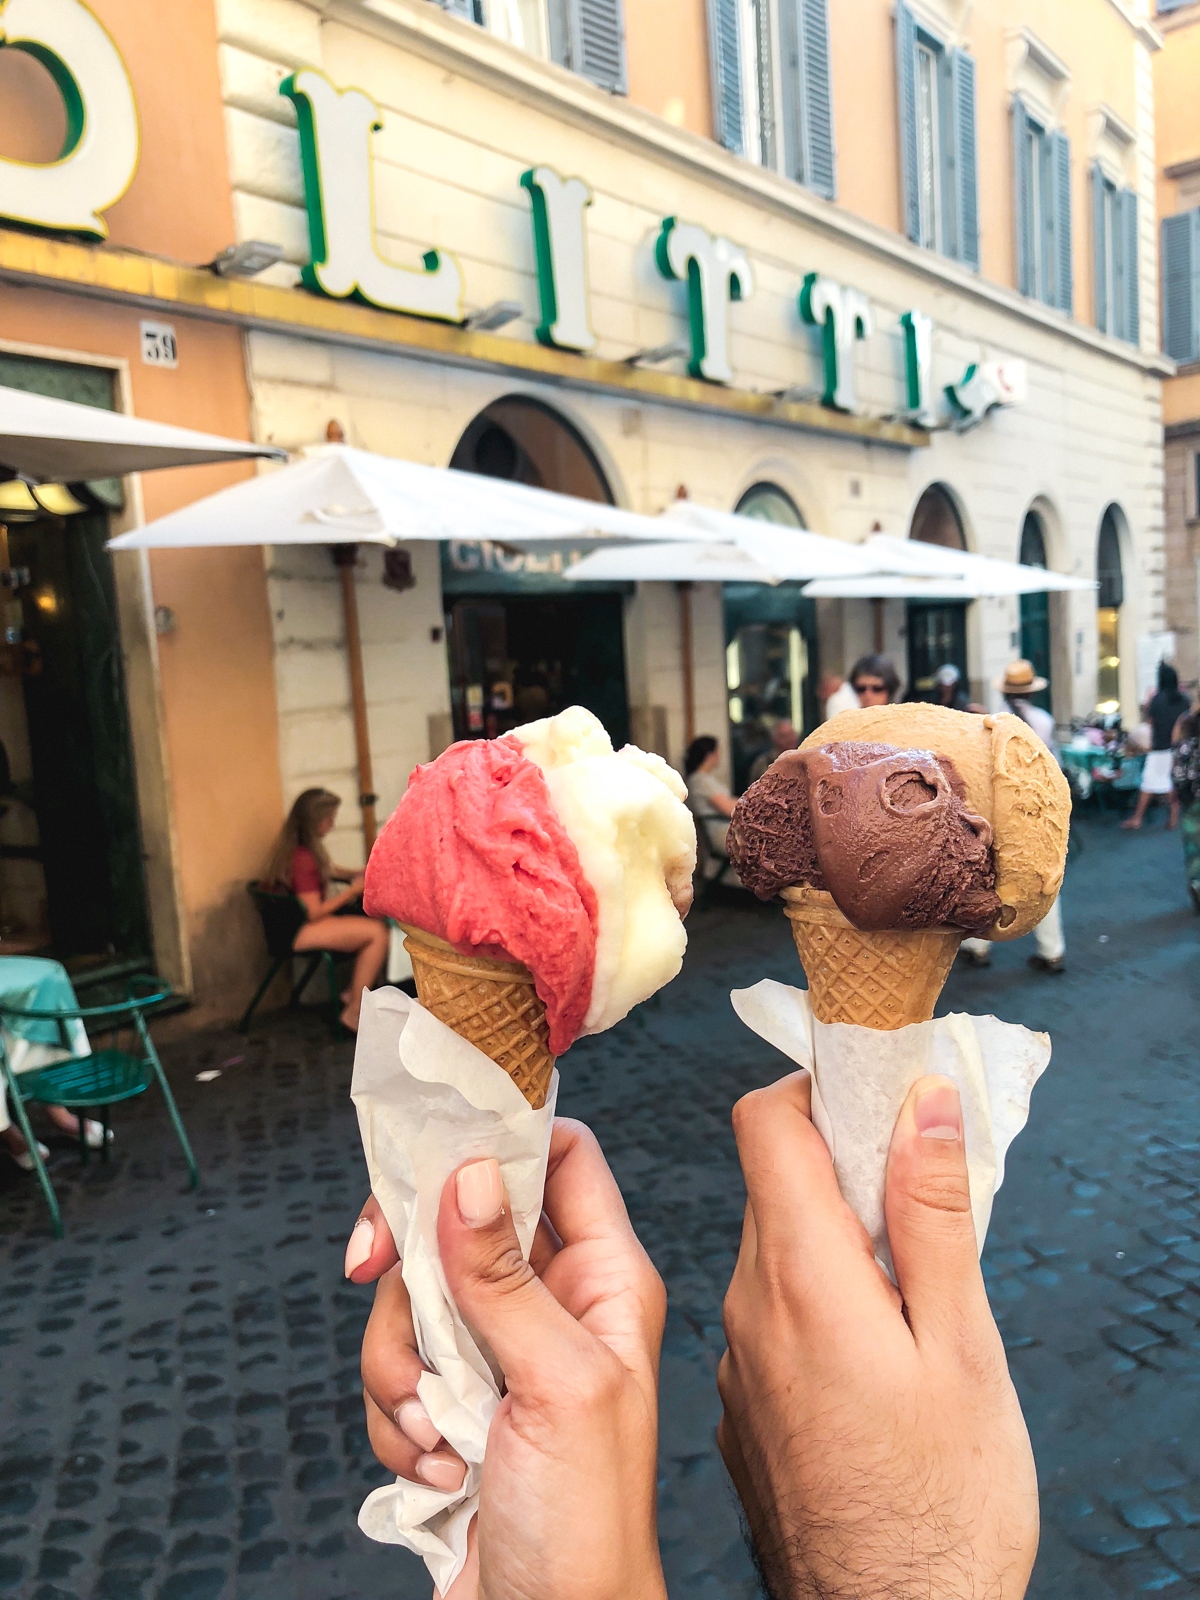 strawberry and lemon gelato for me with espresso and chocolate gelato for hubby from Giolitti 